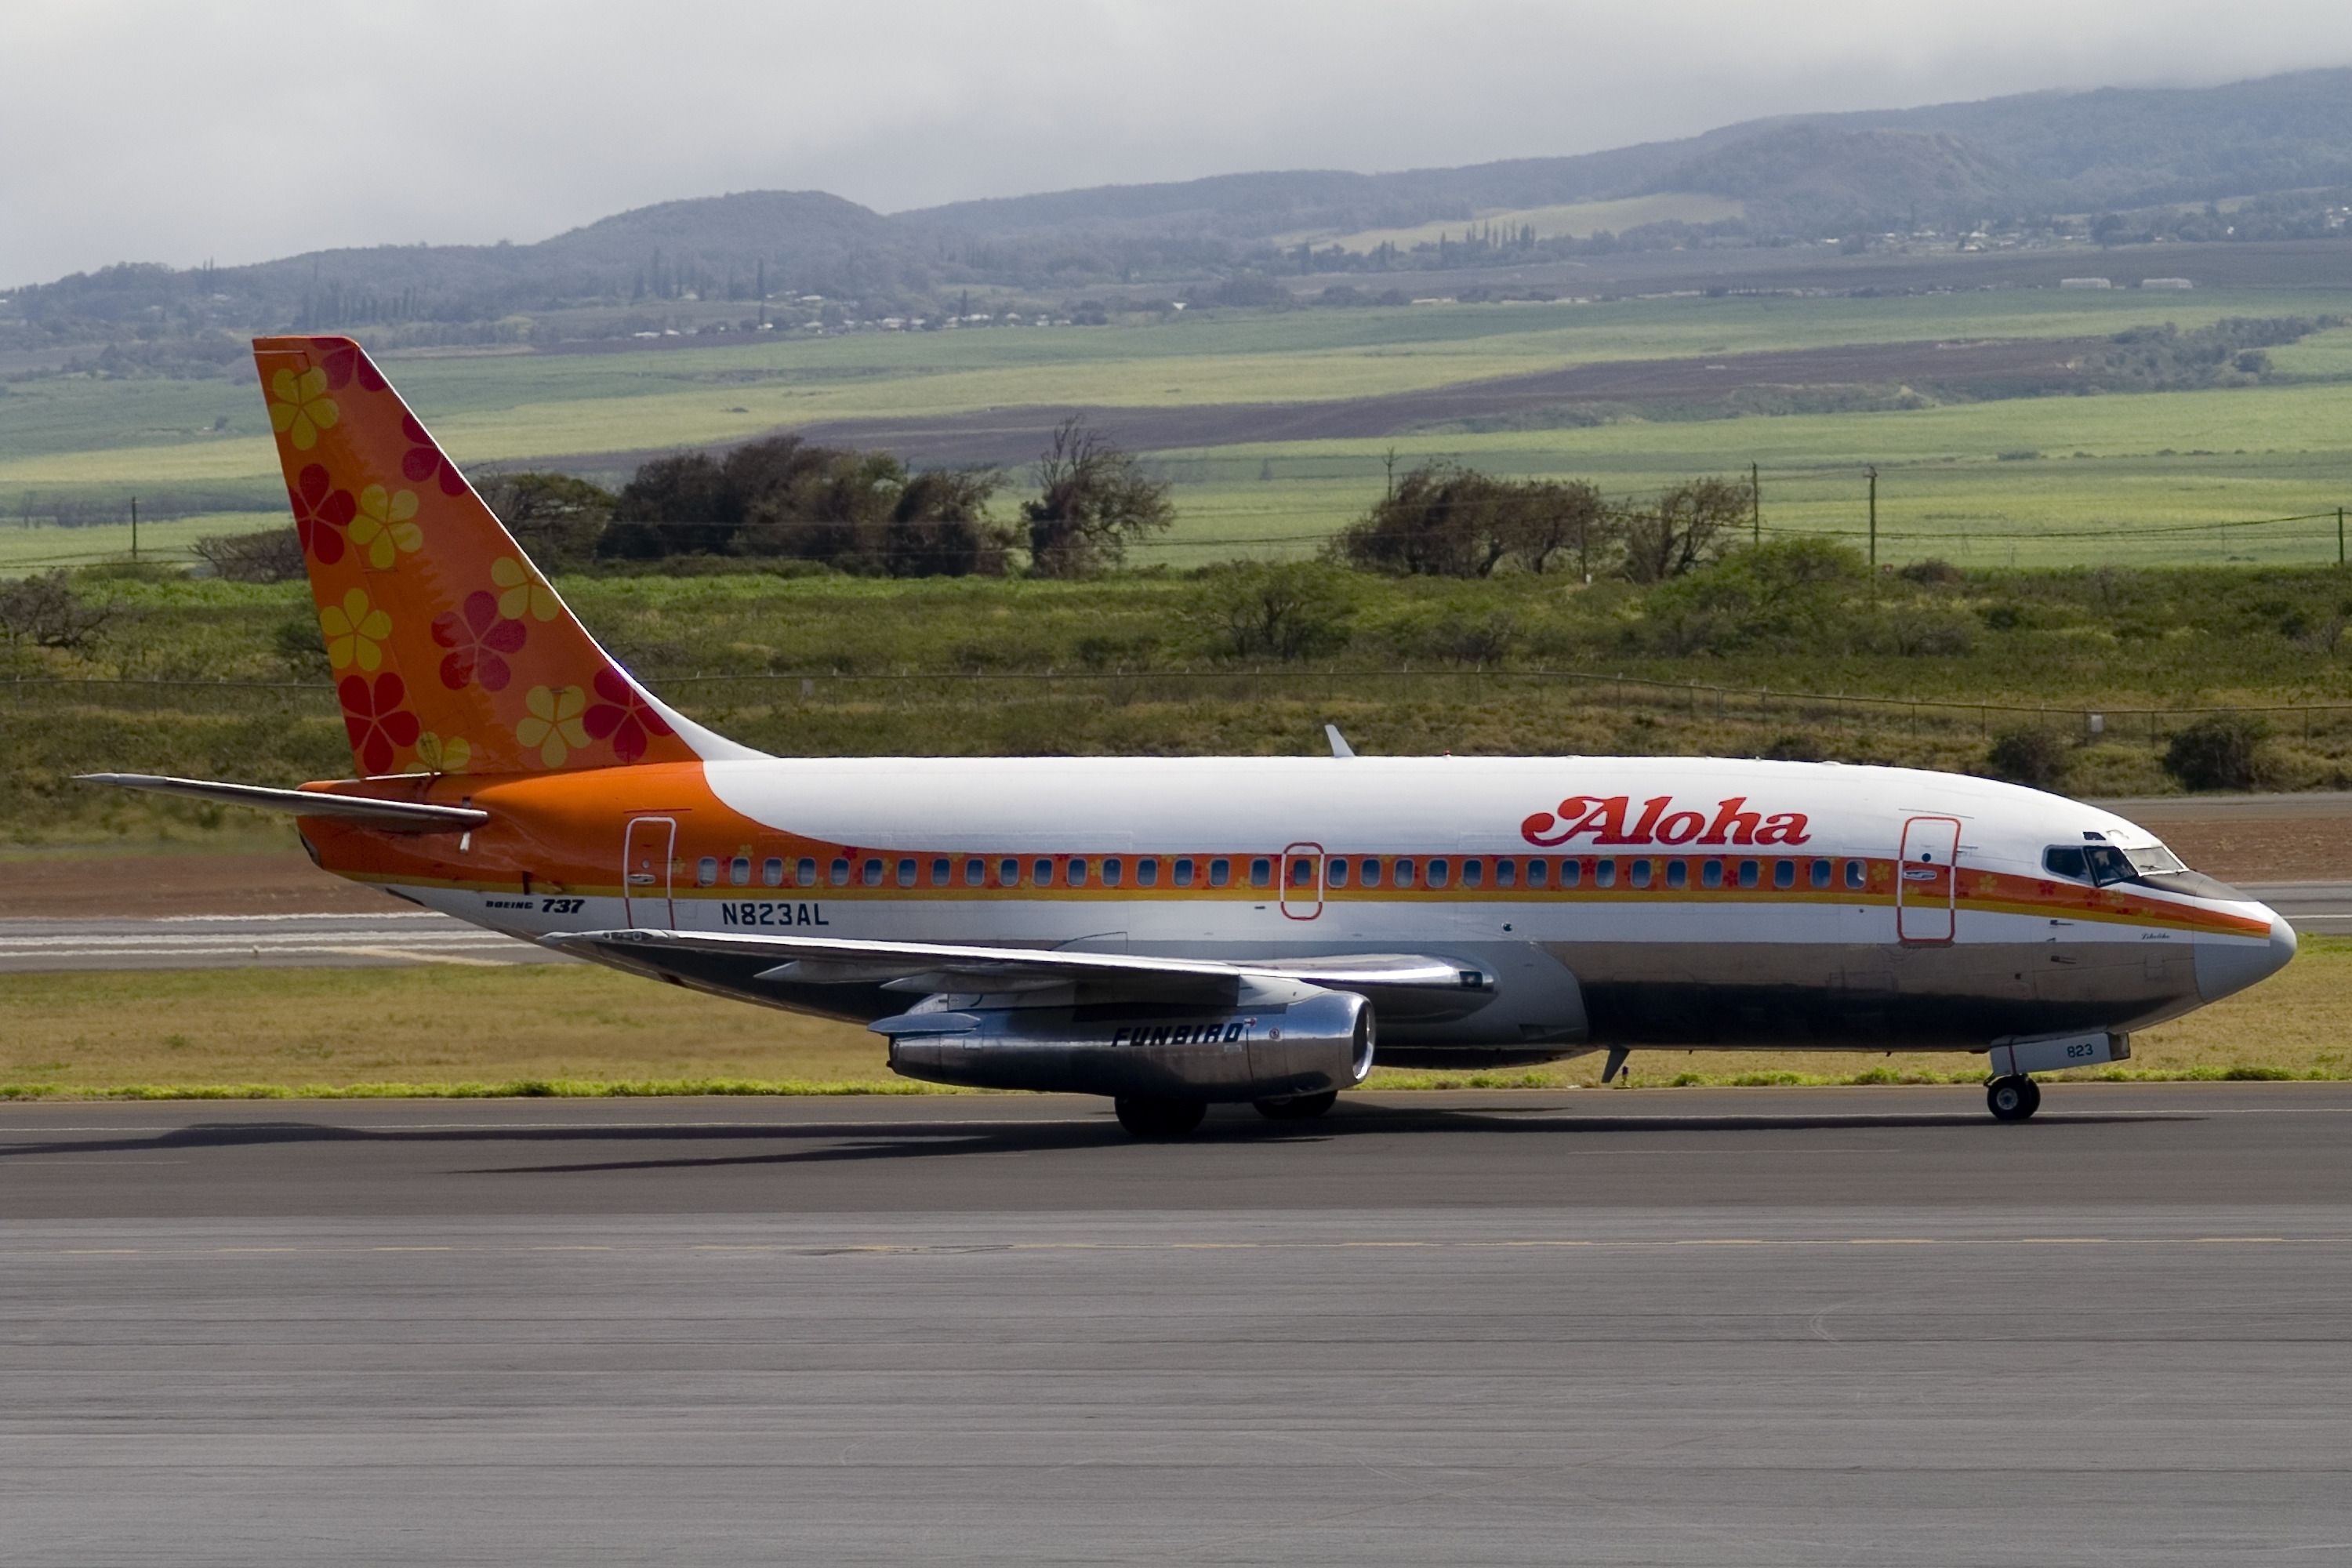 An Aloha Airlines aircraft on a taxiway.